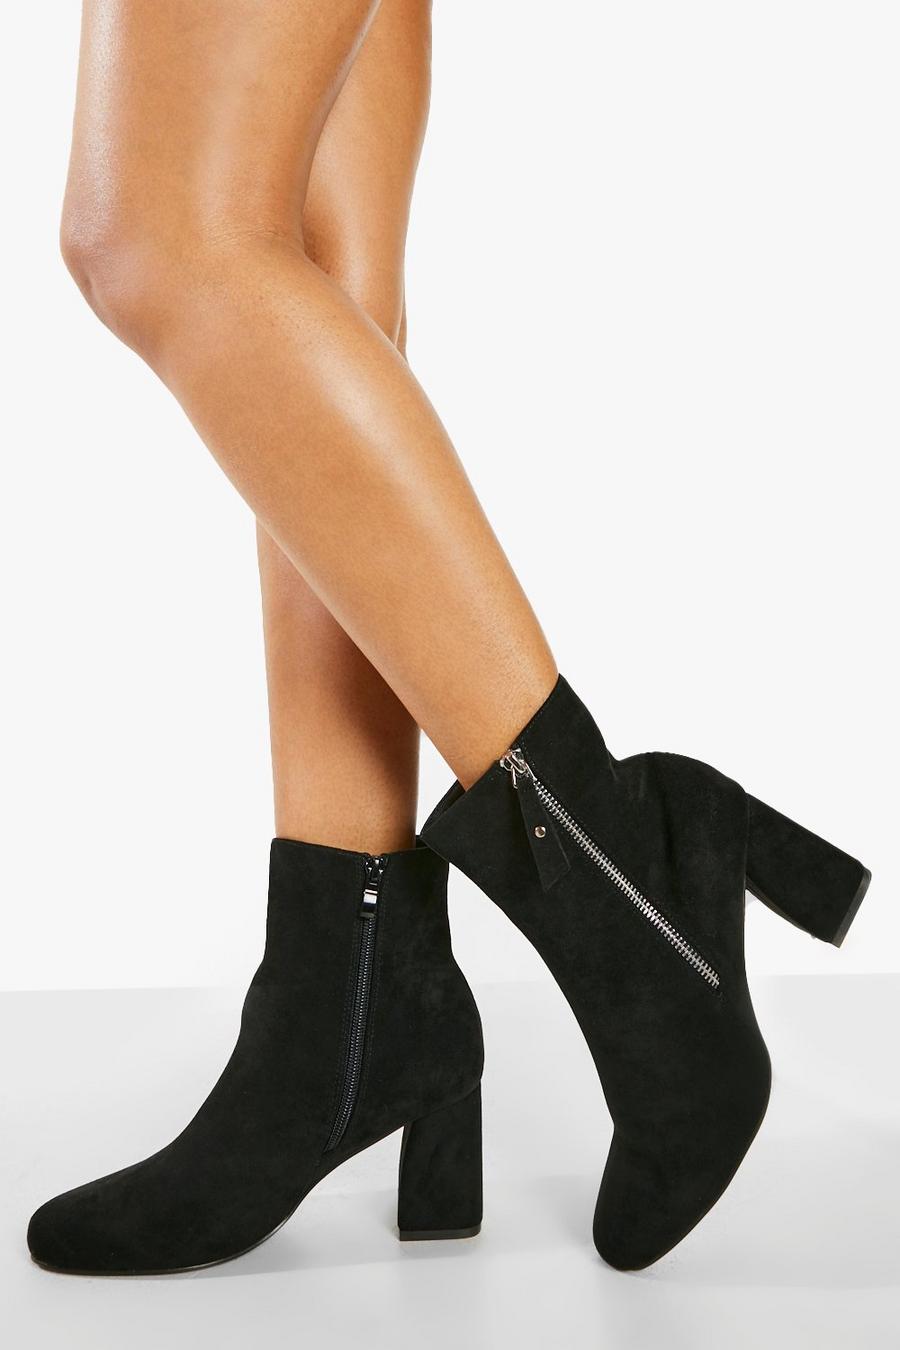 Womens Boots | Lace Up & Black Boots | boohoo Ireland